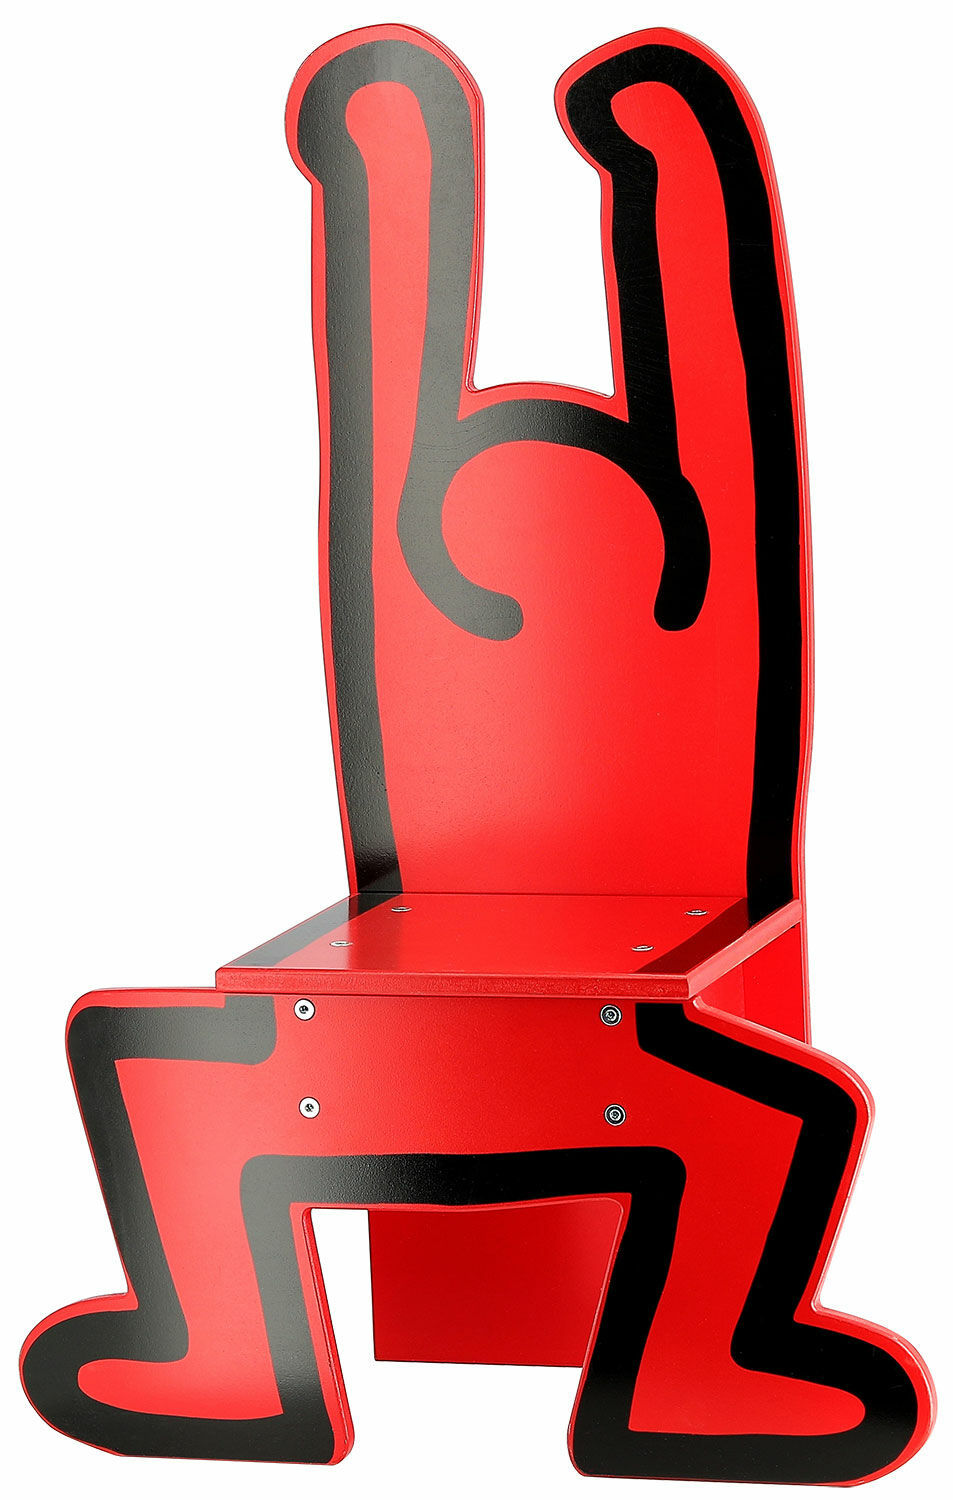 Chaise pour enfants "Keith Haring", version rouge